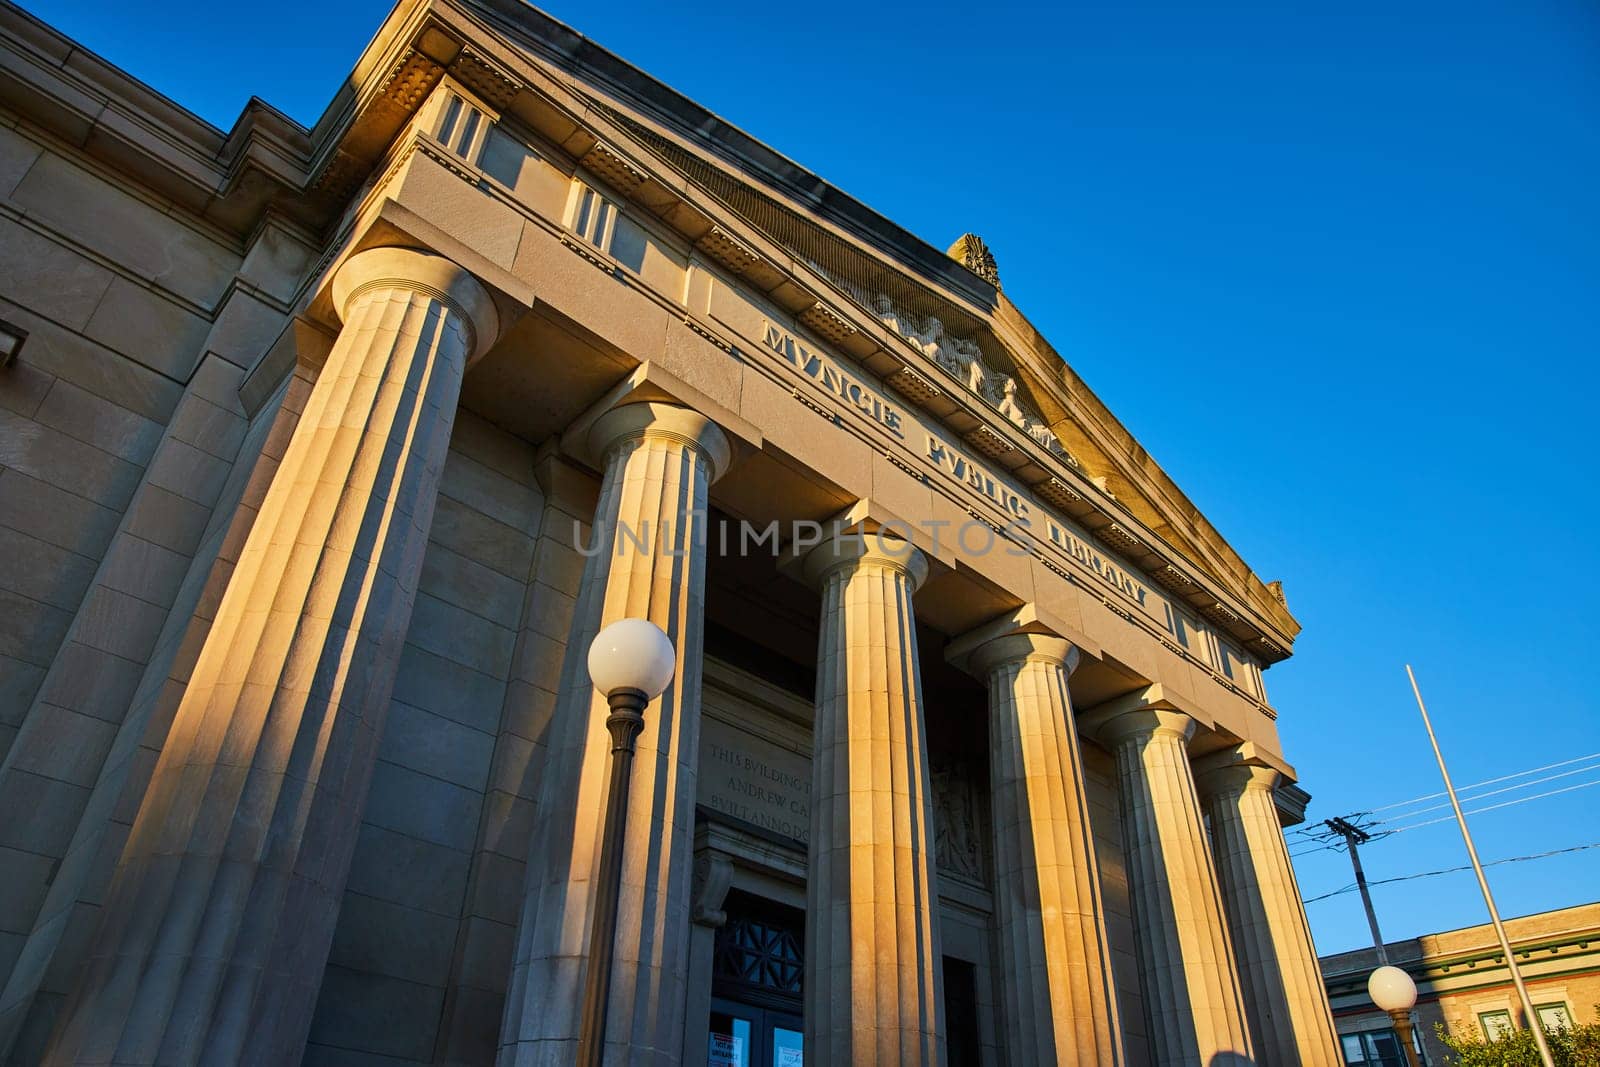 Golden Hour at Muncie Public Library with Classic Columns and Sculptures by njproductions